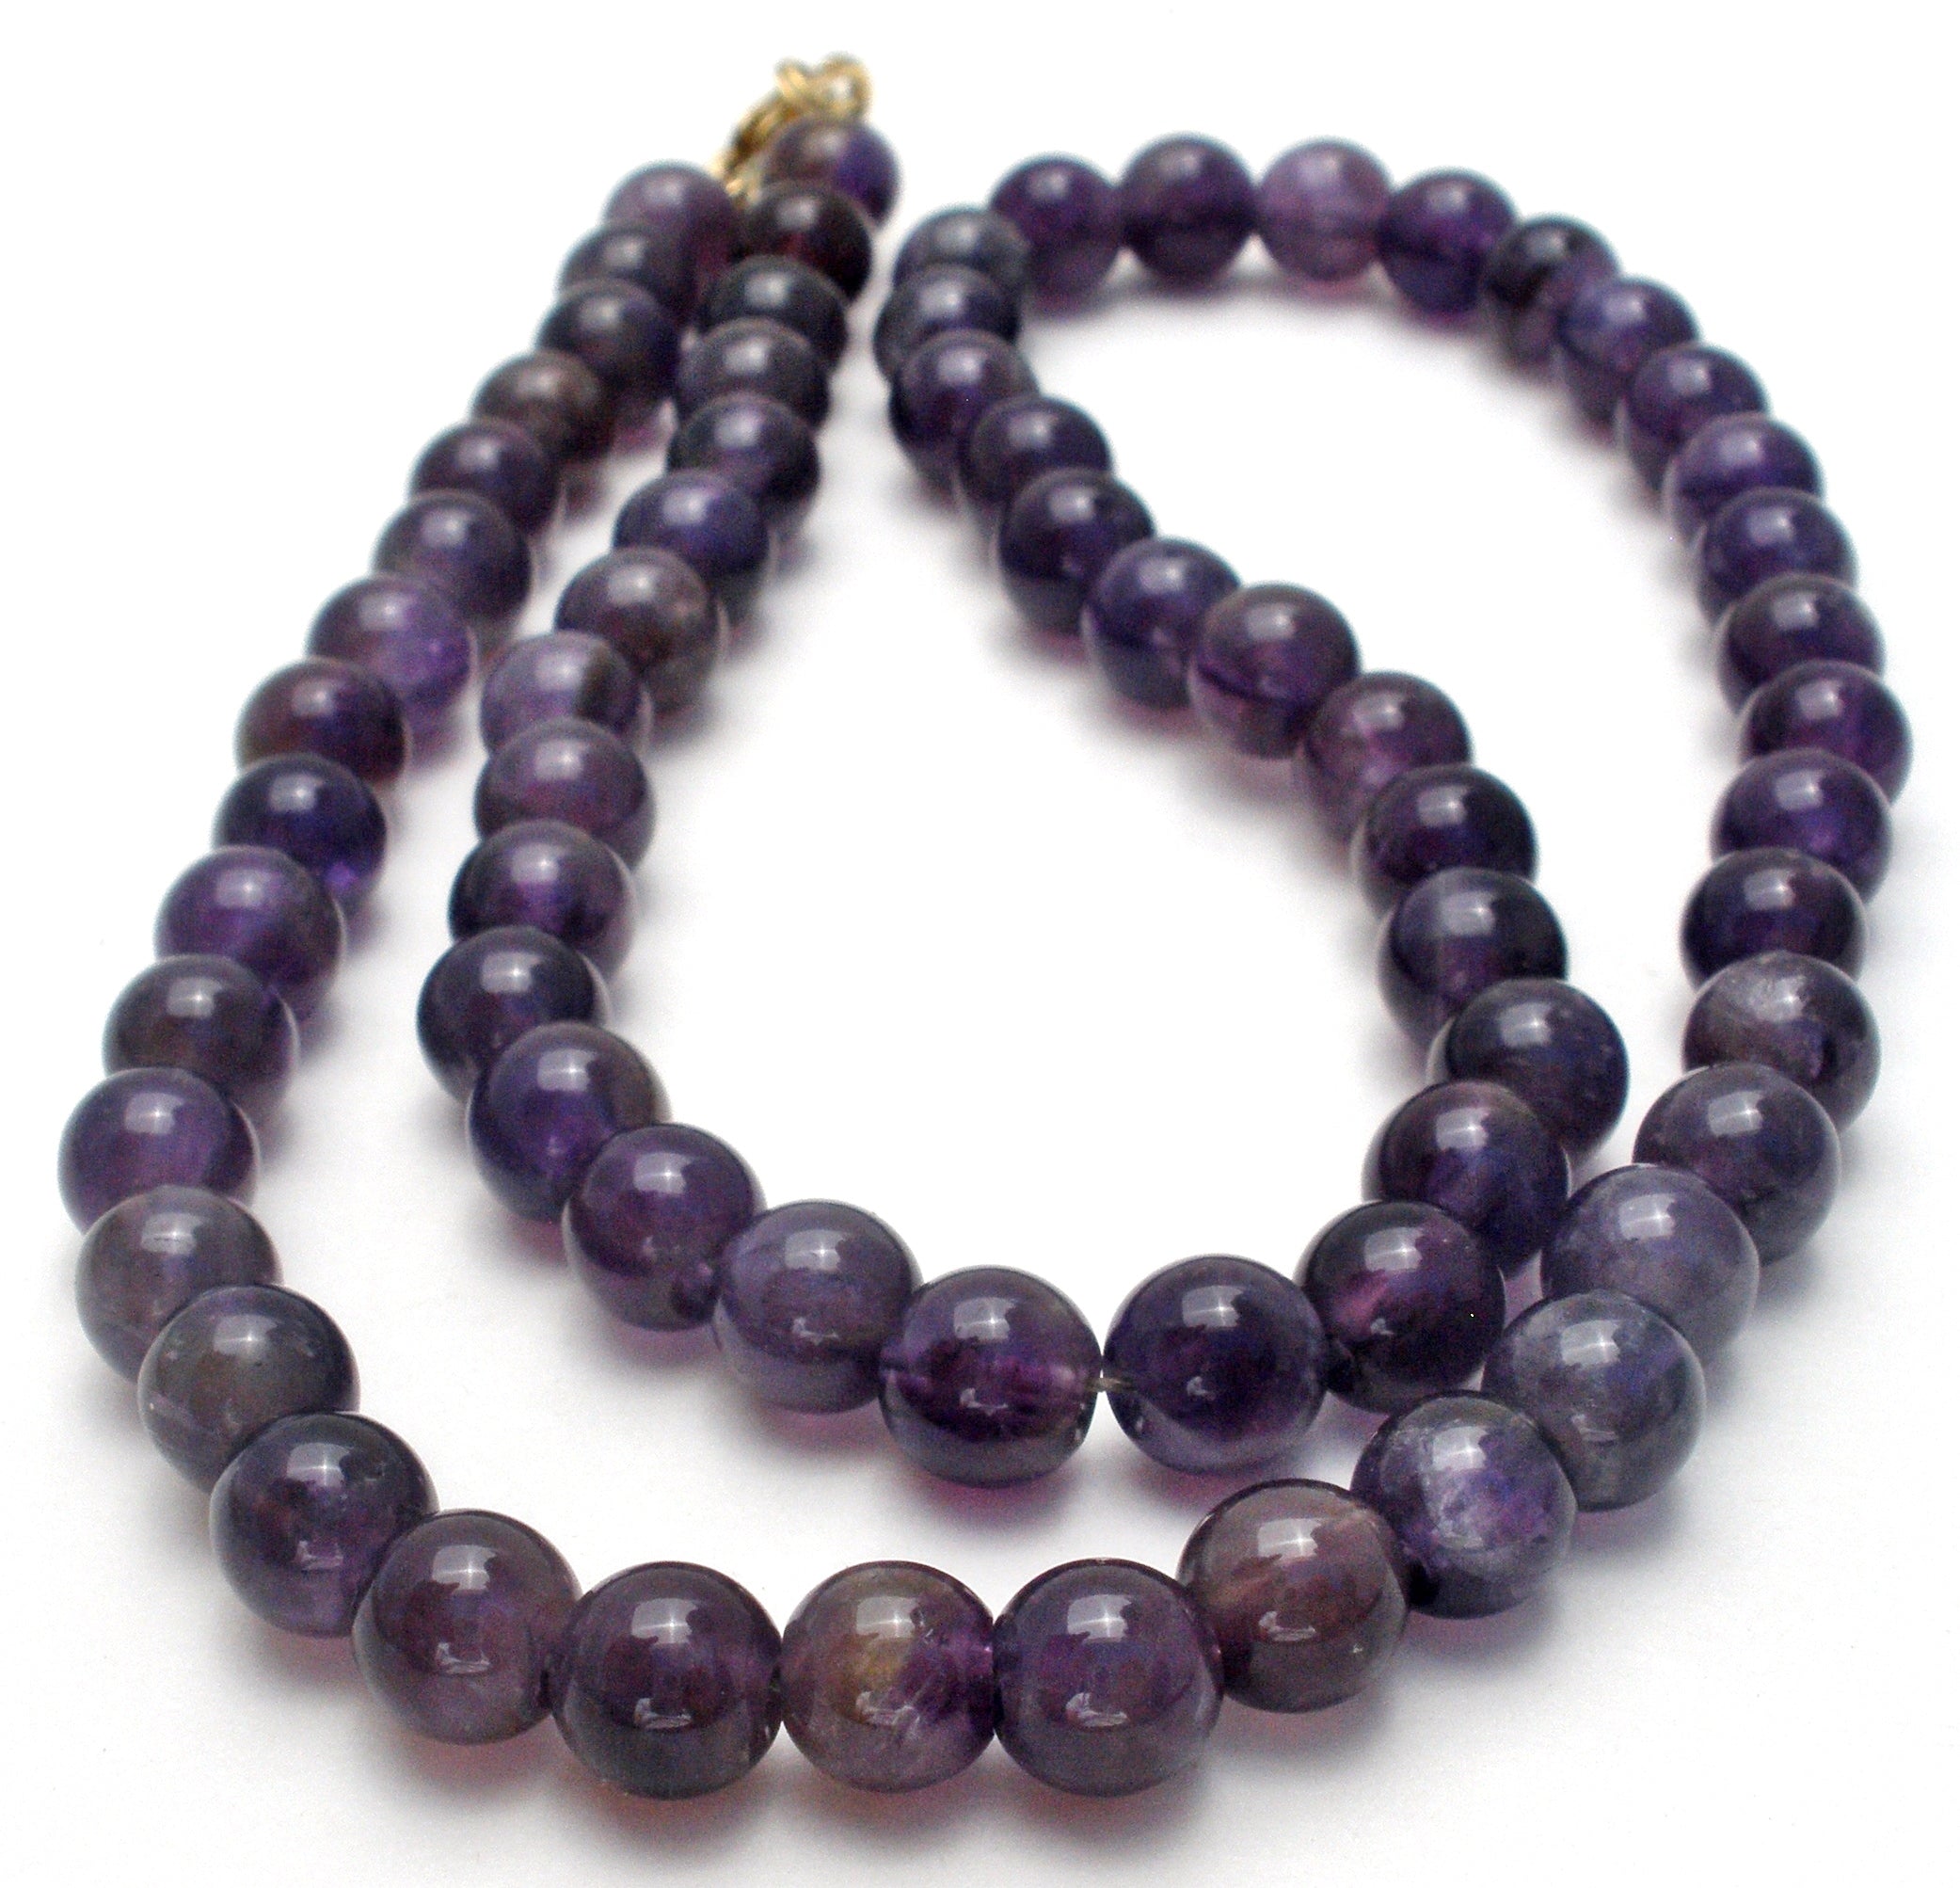 Amethyst Bead Necklace 15.5 Vintage 14K G.F. – The Jewelry Lady's